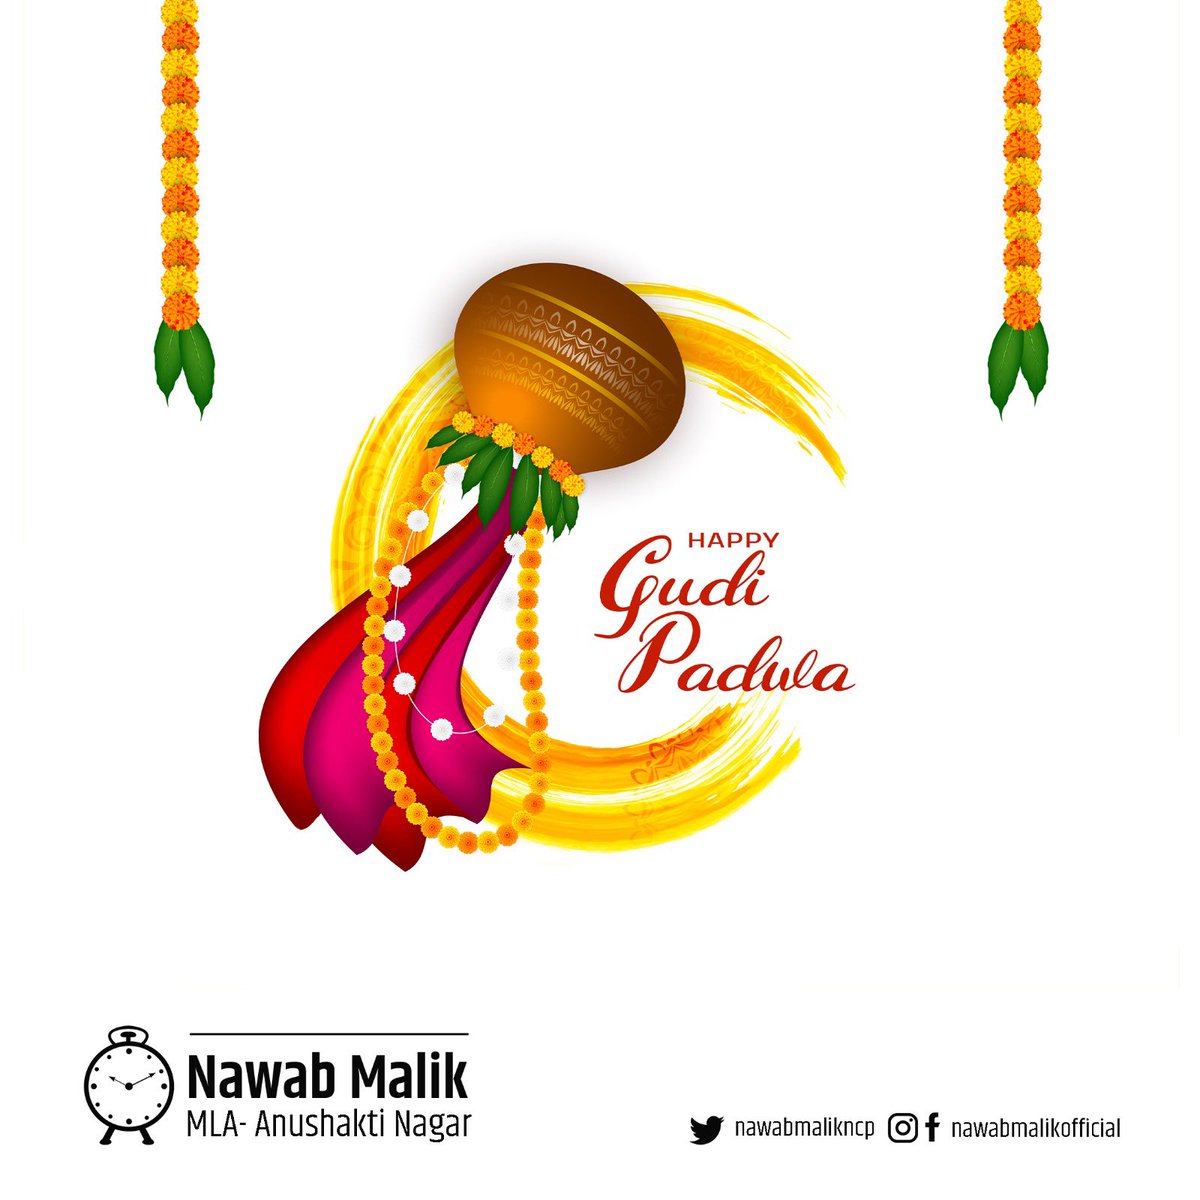 Happy Gudi Padwa! May this new year bring abundant blessings and prosperity to you and your family. #GudiPadwa2024